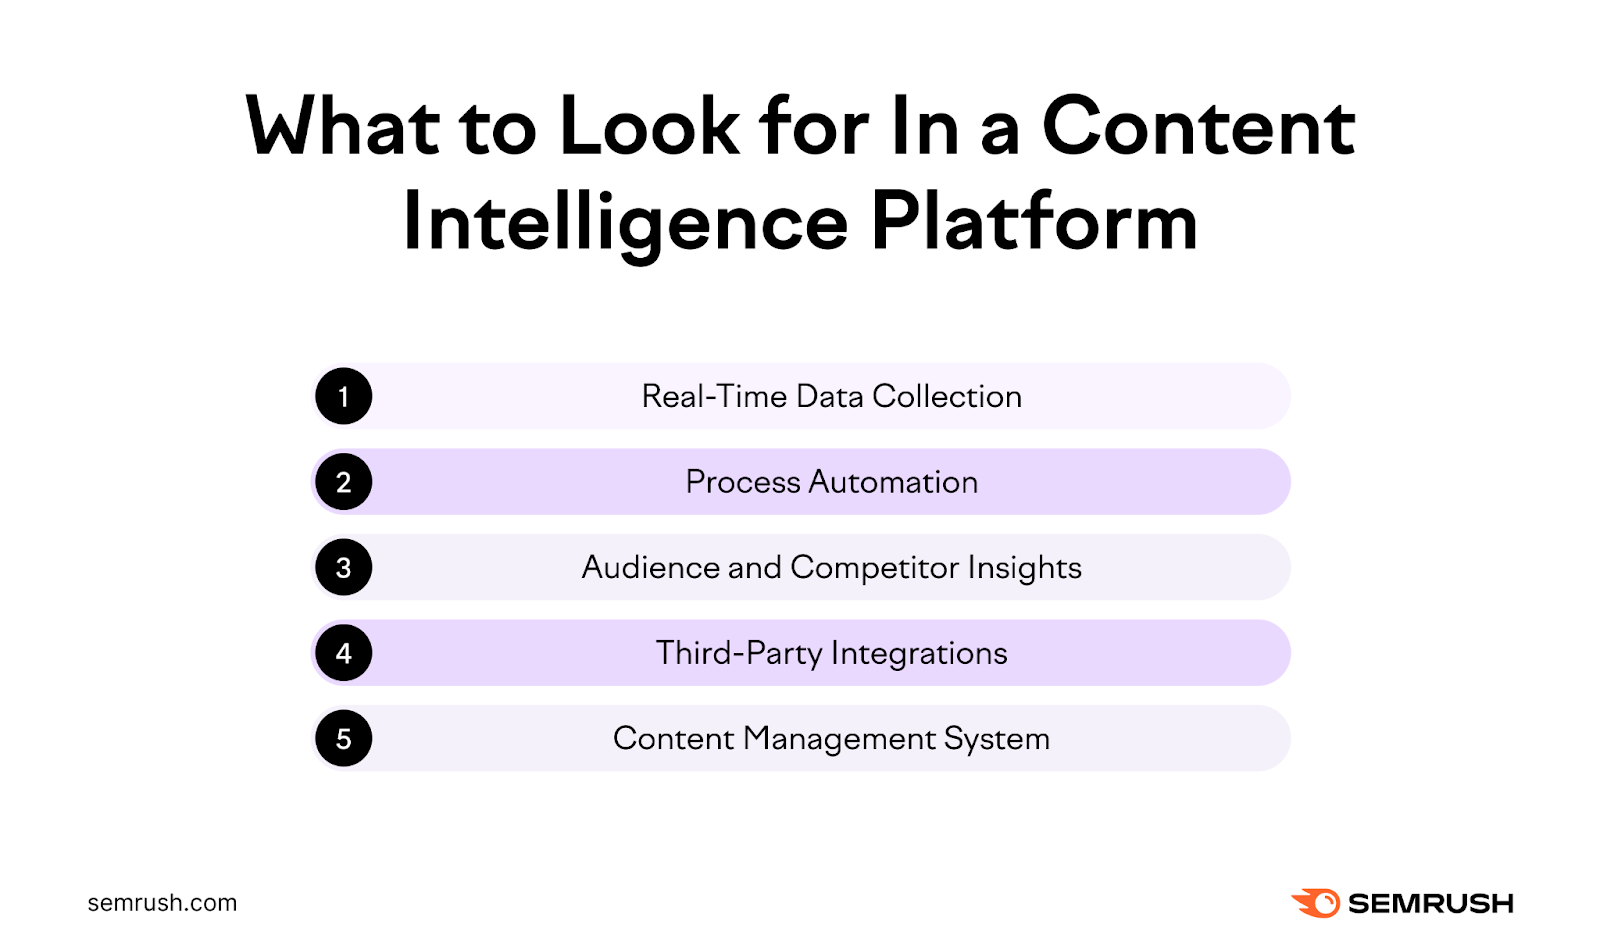 an image listing what to look for in a content intelligence platform